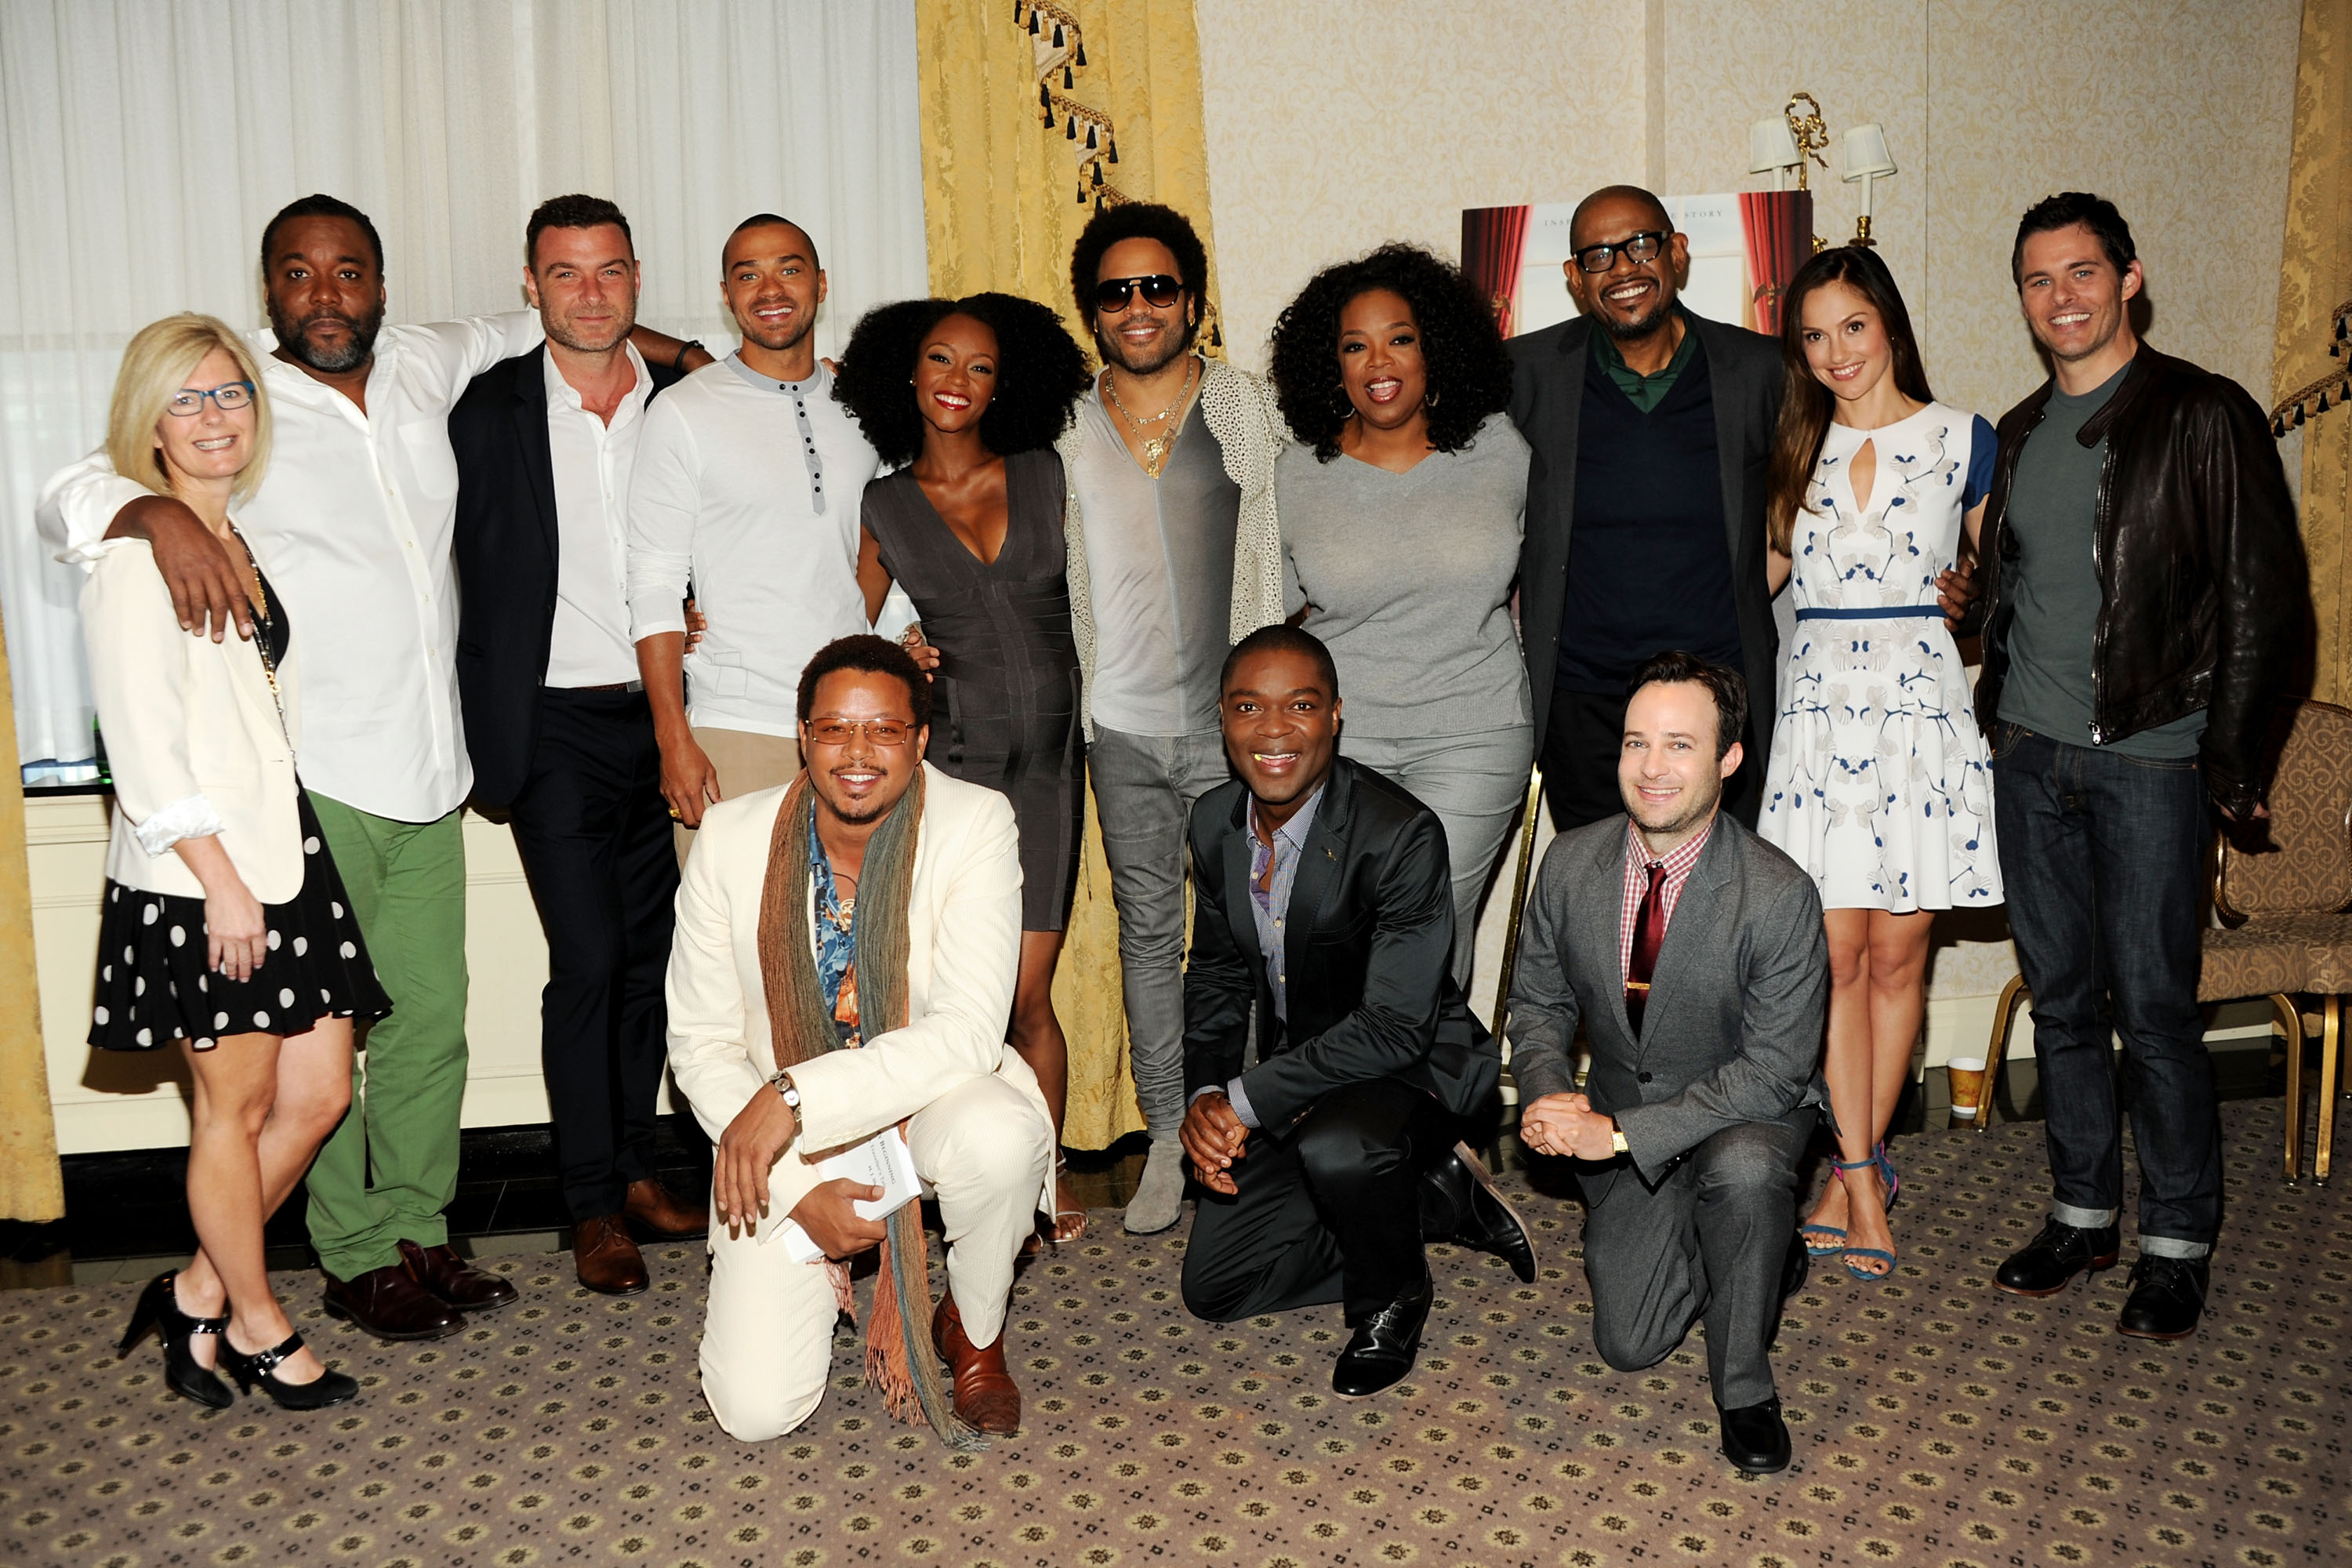 The “Lee Daniels' The Butler” Interview